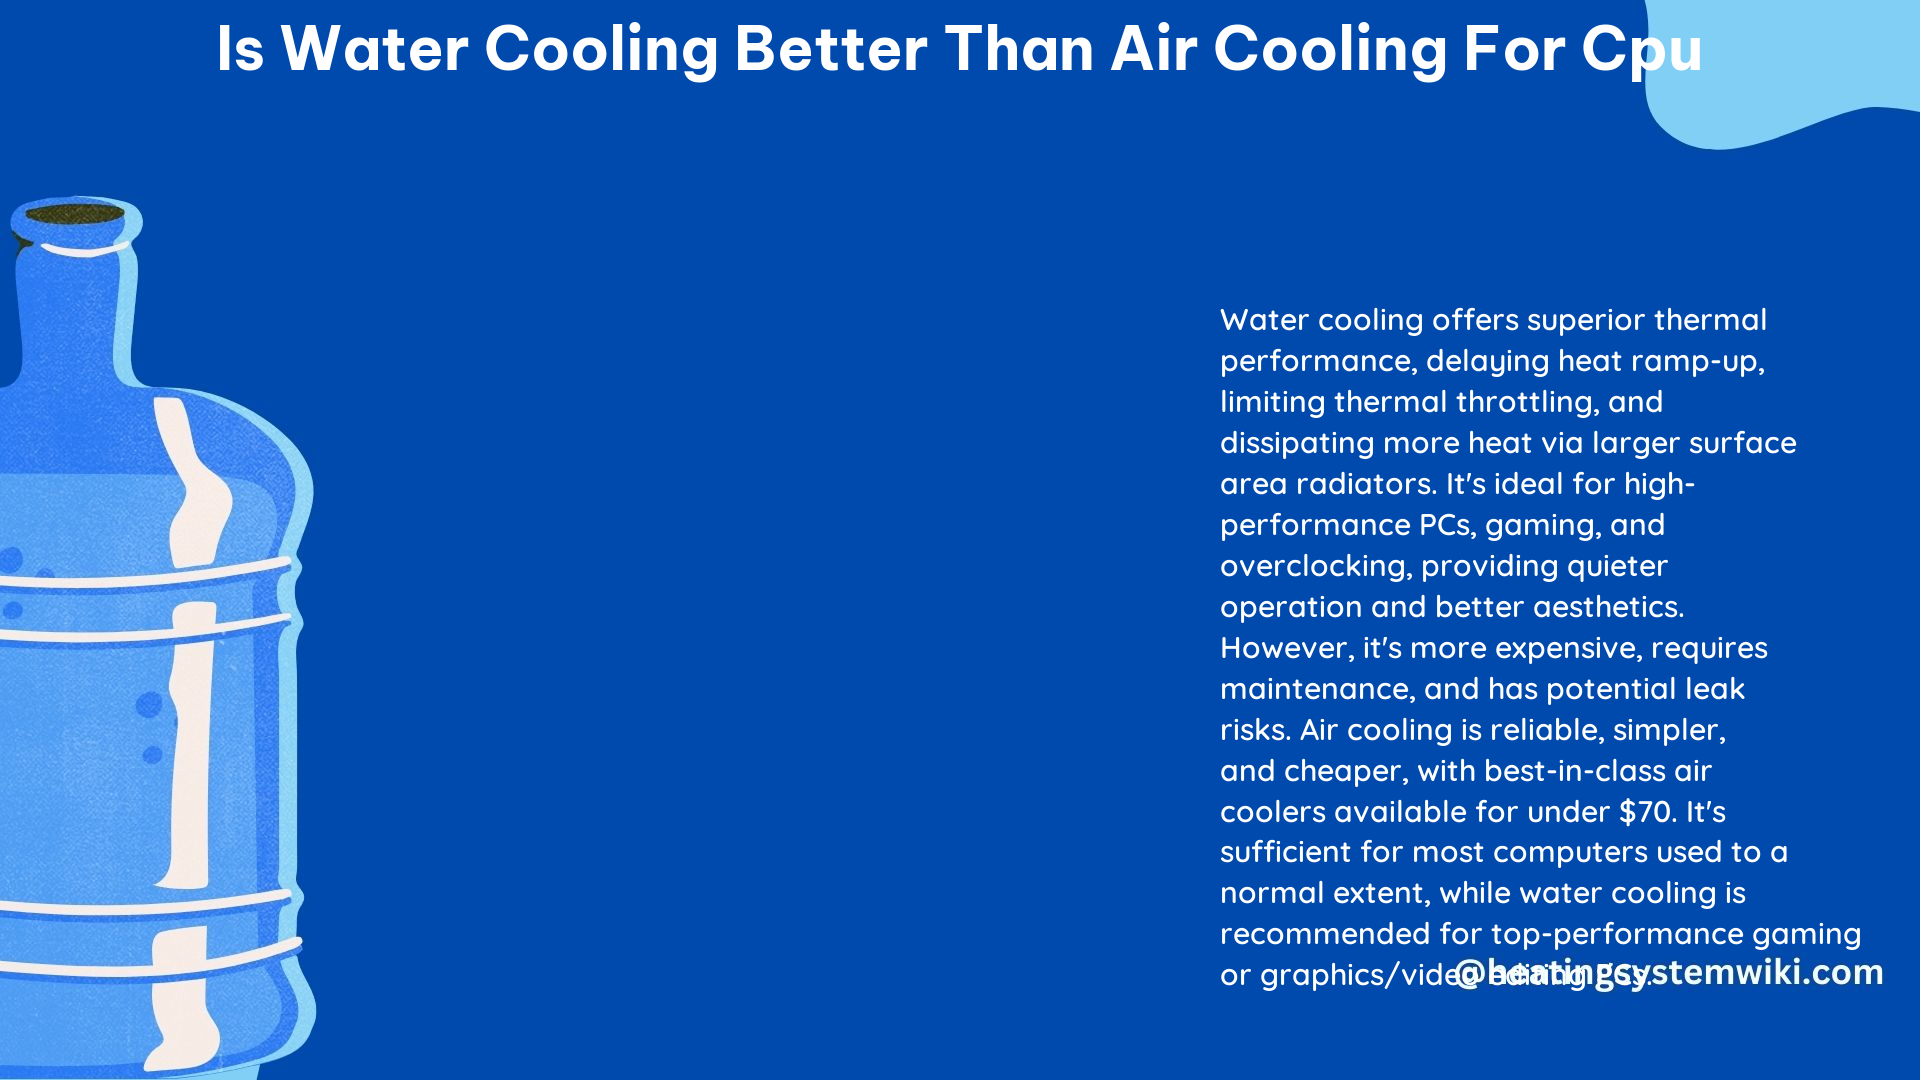 Is Water Cooling Better Than Air Cooling for CPU